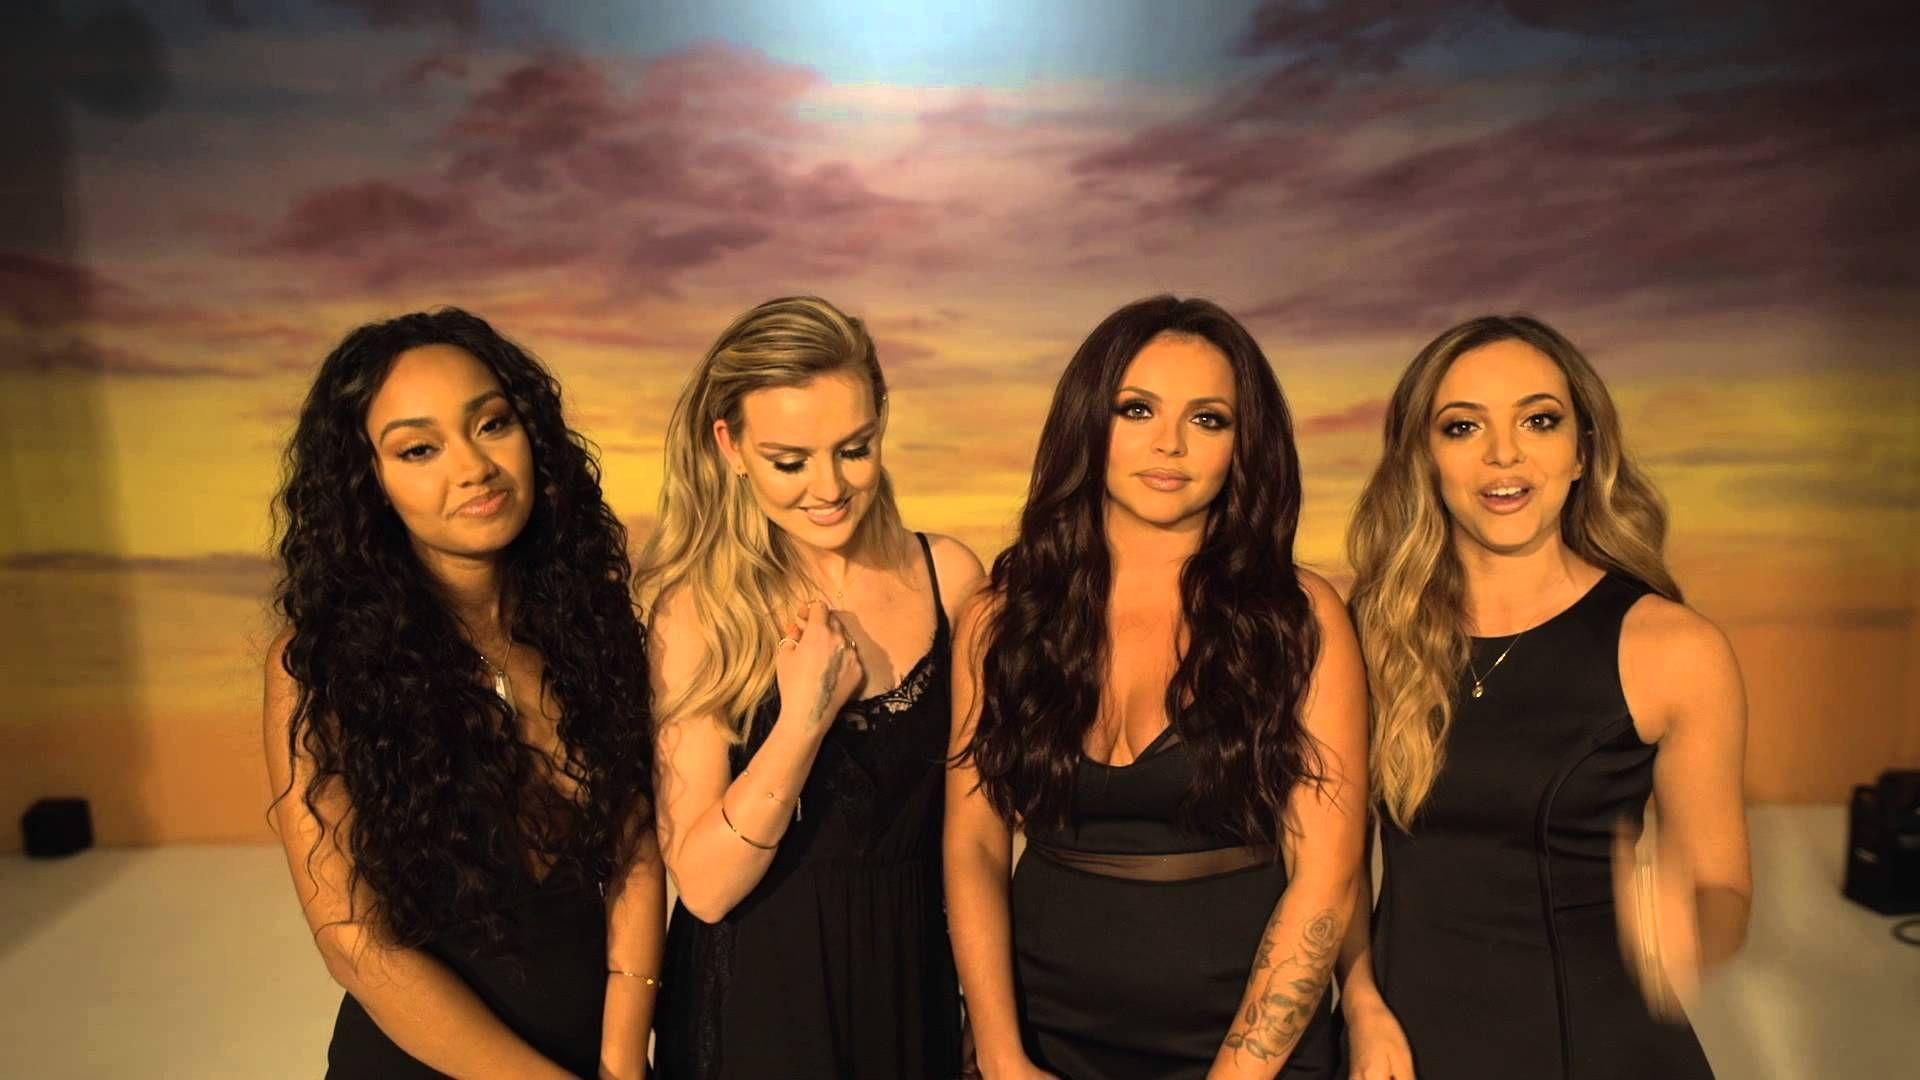 Little Mix Wallpaper Image Photo Picture Background